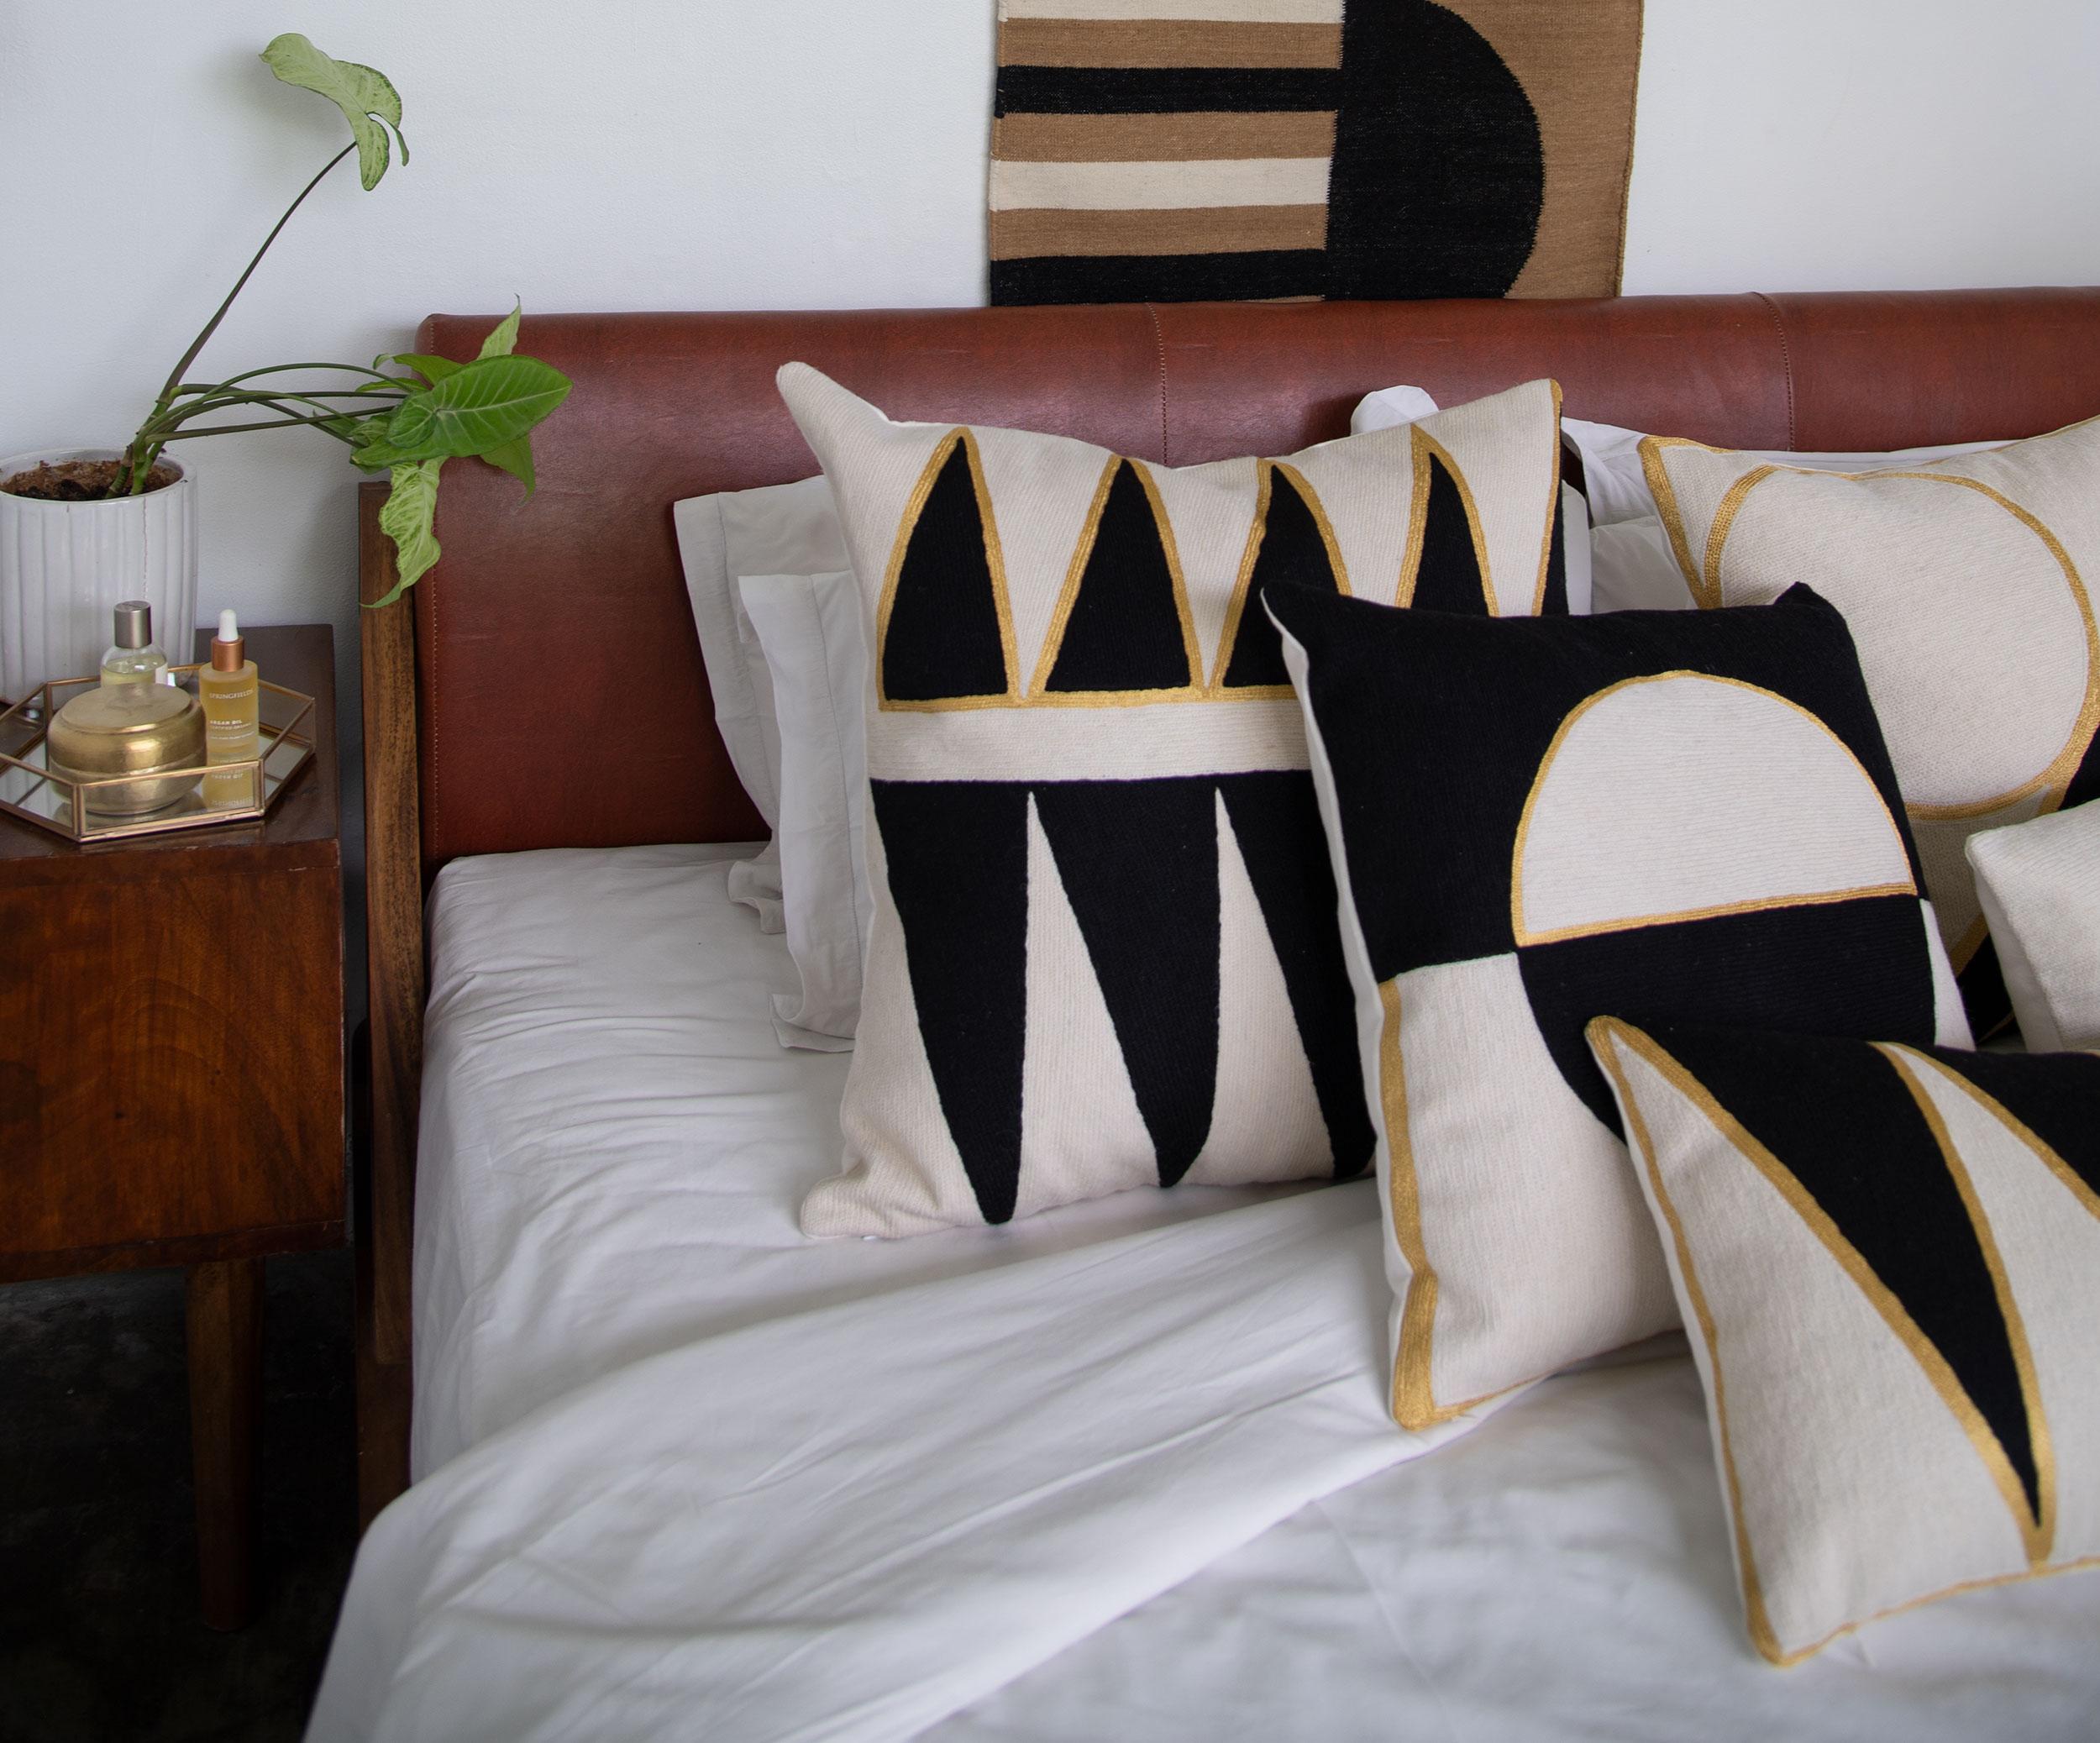 These geometric throw pillows have been ethically hand embroidered by artisans in Kashmir, India, using a traditional embroidery technique which is native to this region.

The purchase of this handcrafted pillow helps to support the artisans and